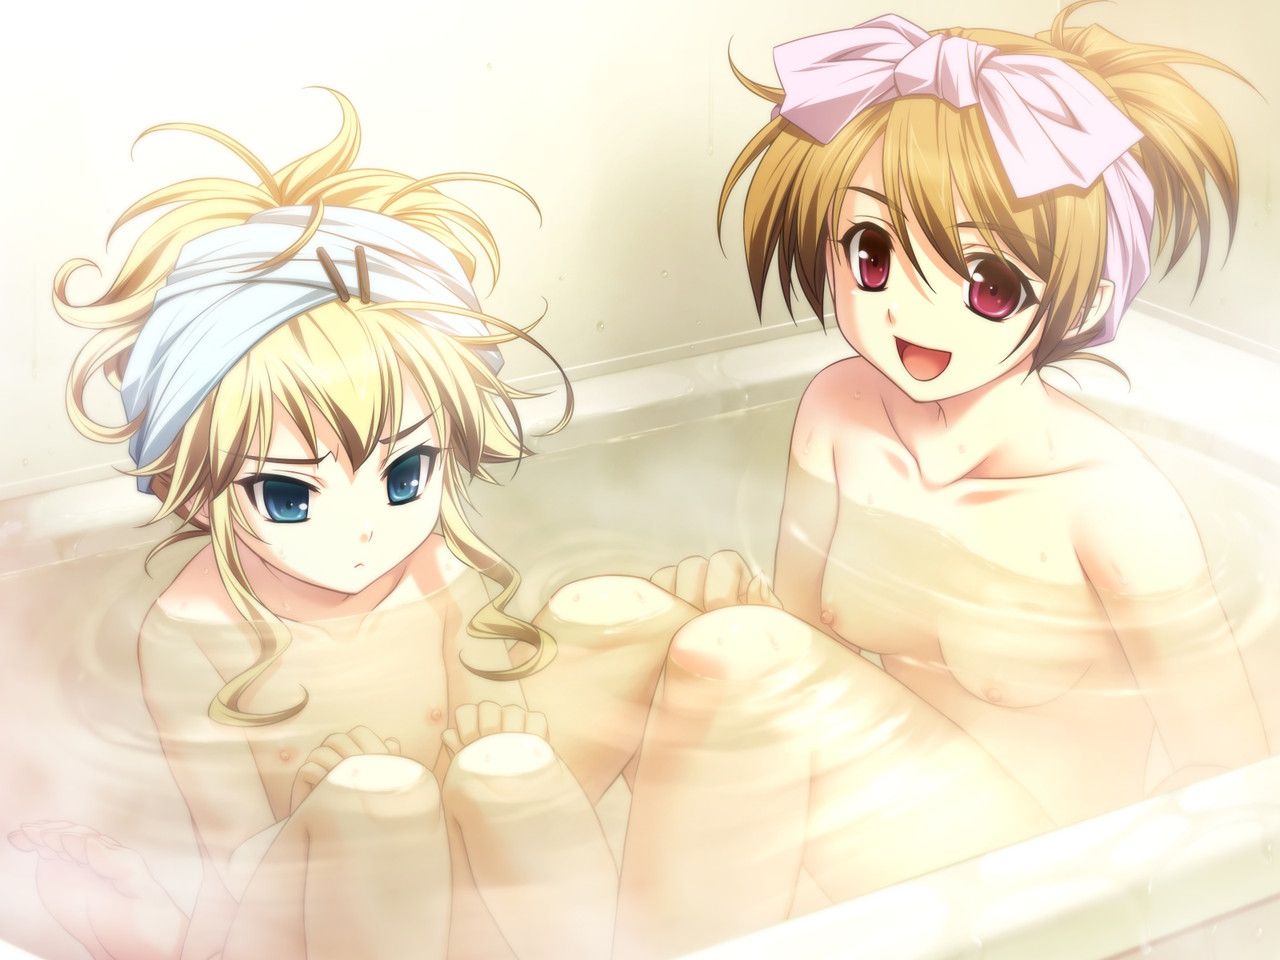 Bath image that I want to do lewd thing covered with foam 5